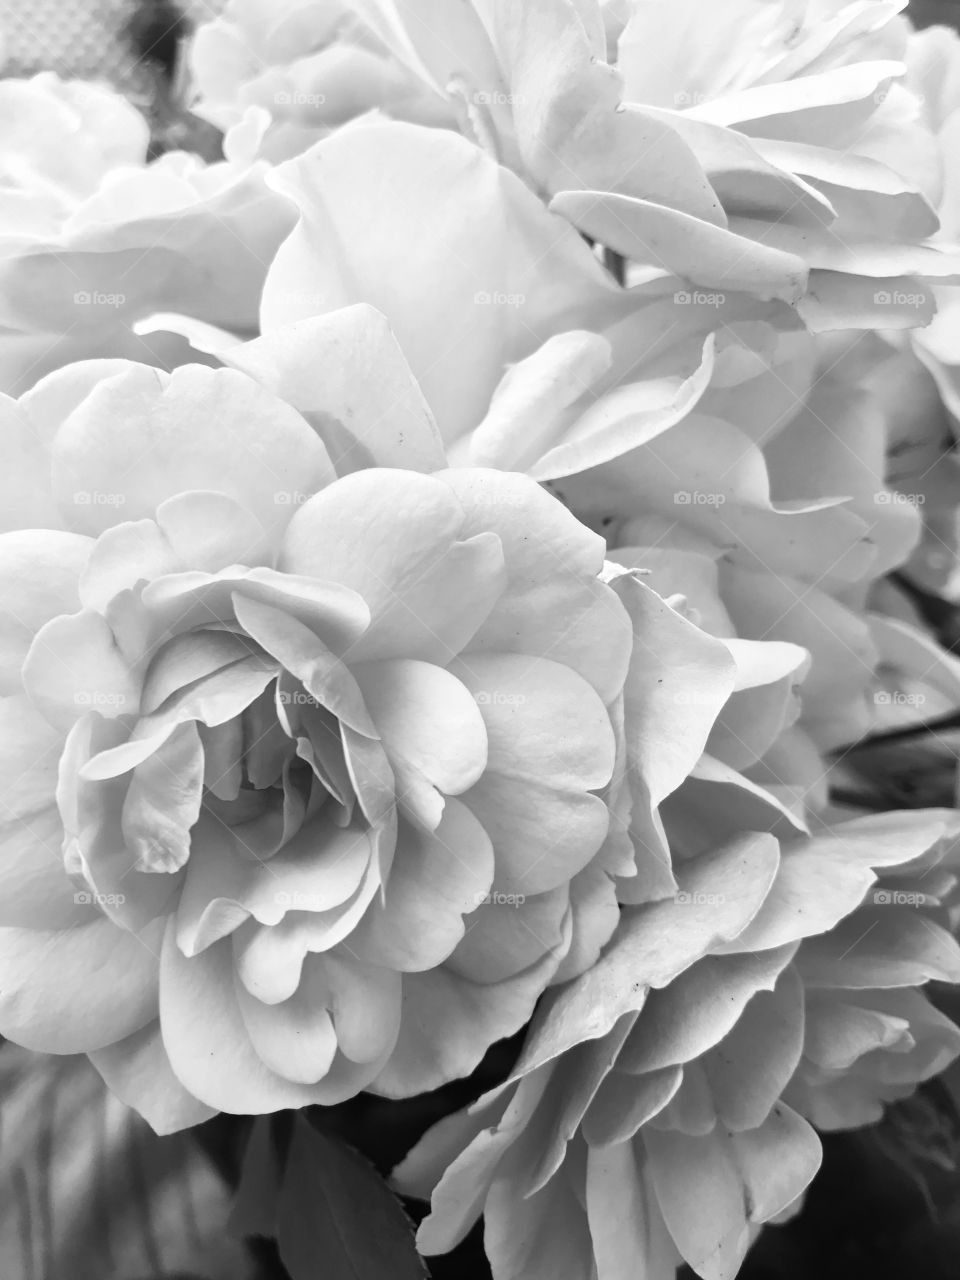 Sitting on my deck watching the golden sun set admiring my deck garden. Some pale roses I cut from my overgrown rosebush make a beautiful monochrome subject with the different tones of the subtle & delicate pink petals. 